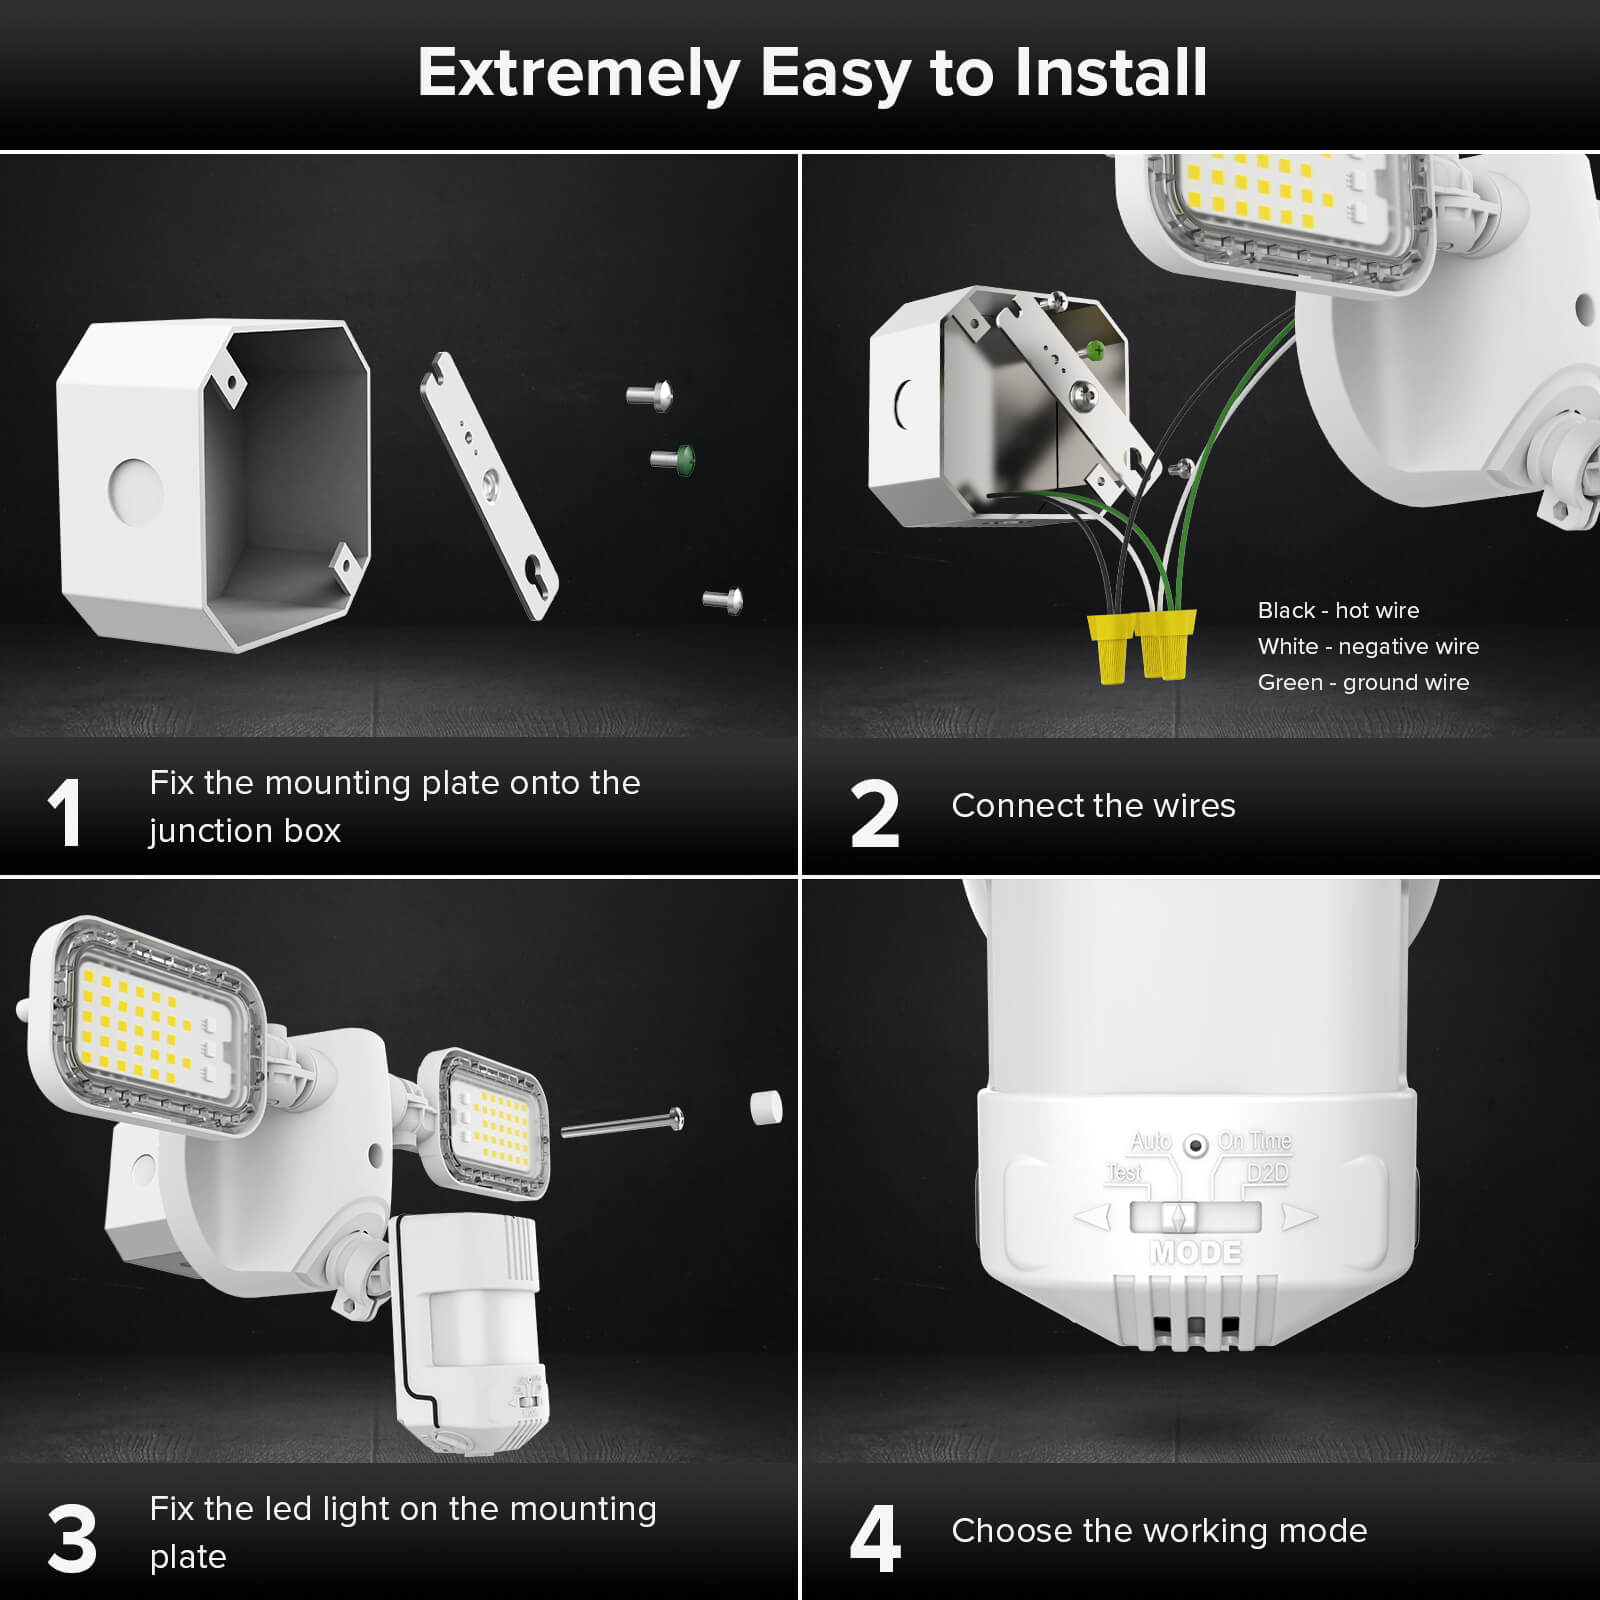 90W LED Security Light (Dusk to Dawn & Motion Sensor) is extremely easy to install